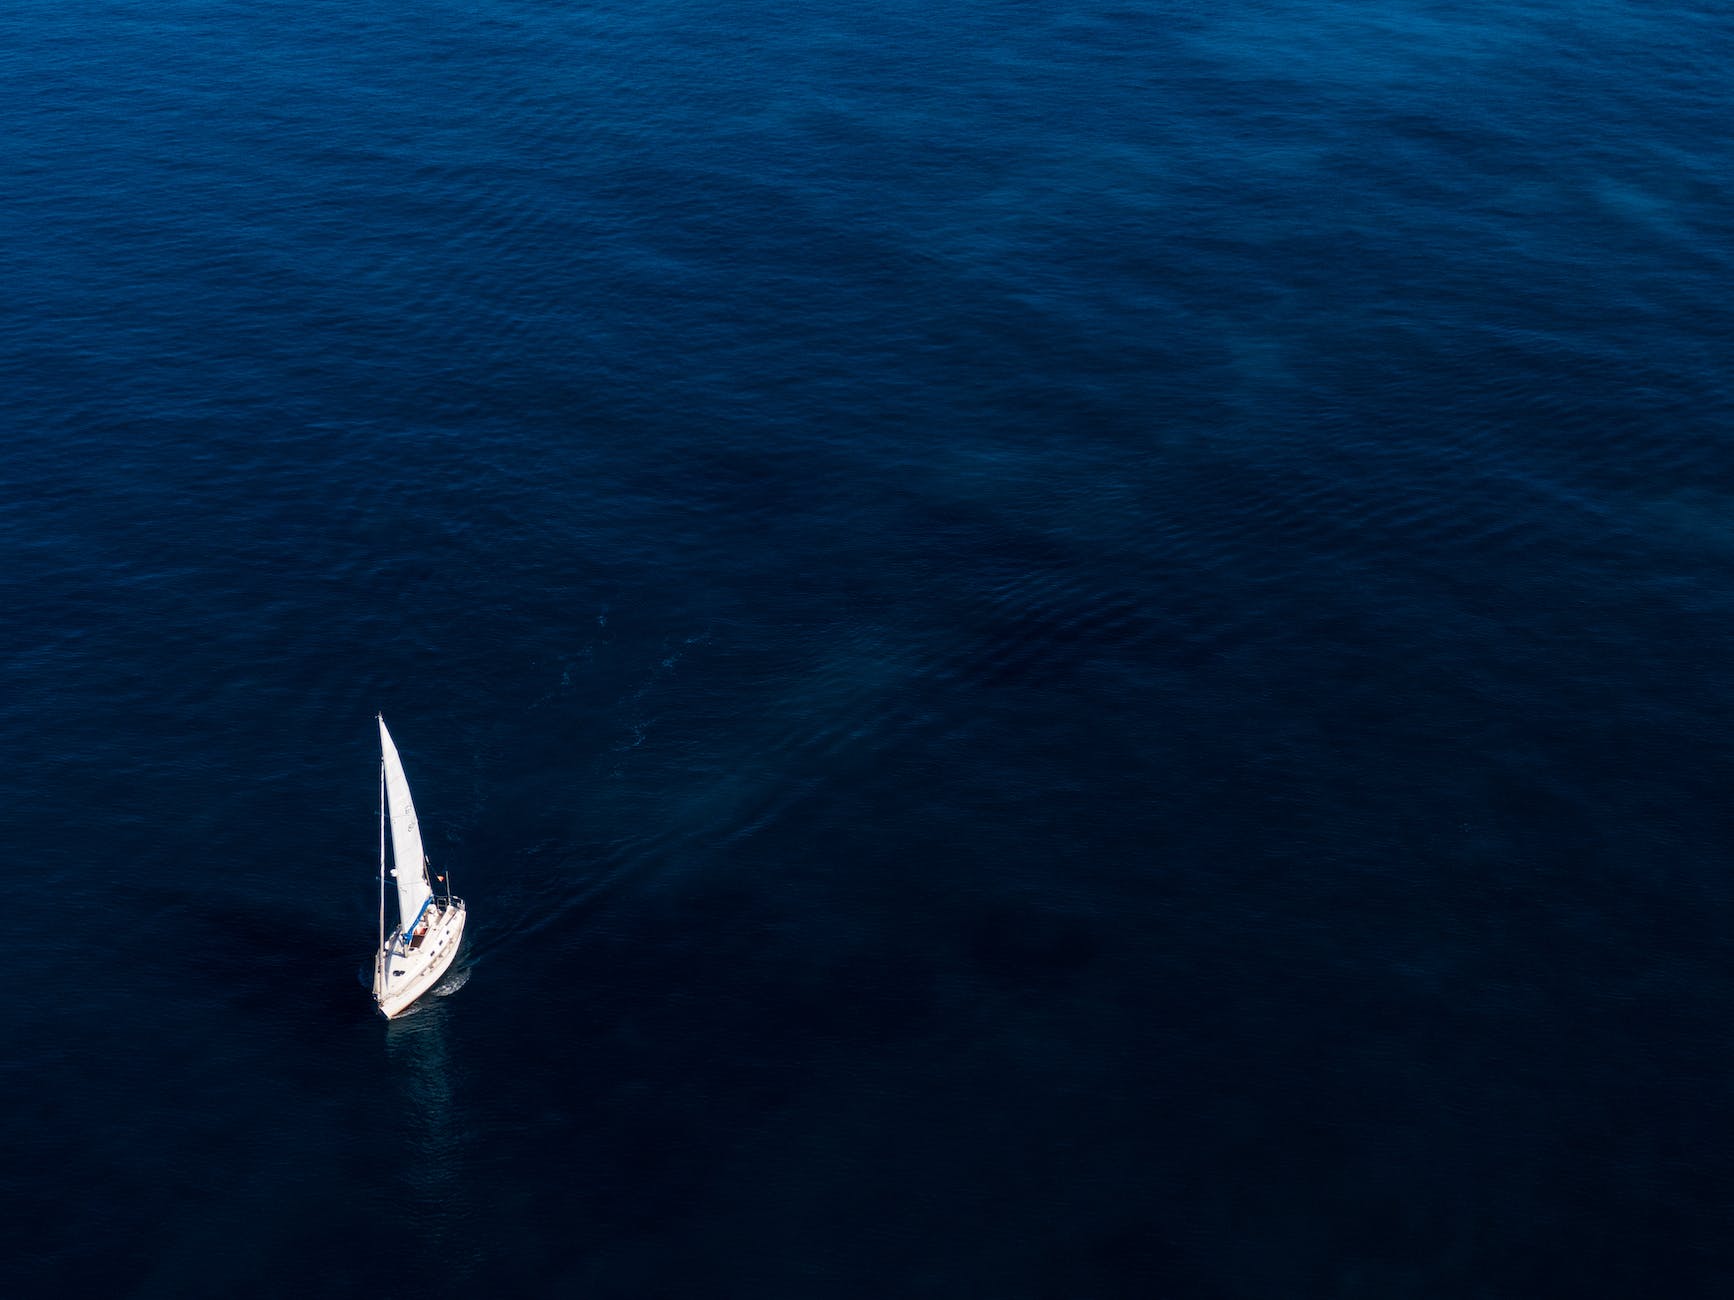 A sailing boat navigating in the deep blue sea